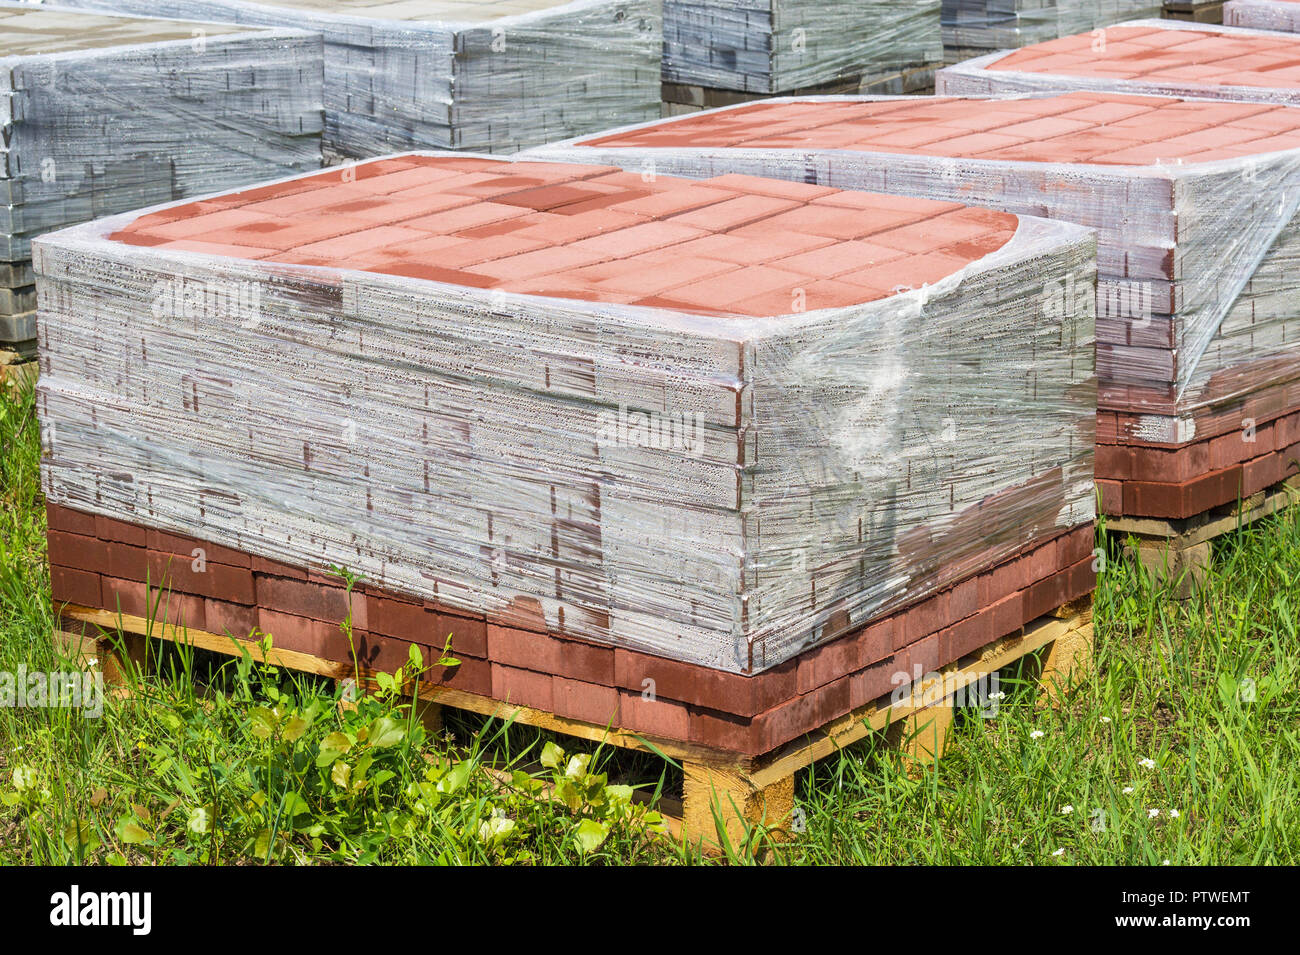 Red paving slab on pallets, red paving brick Stock Photo